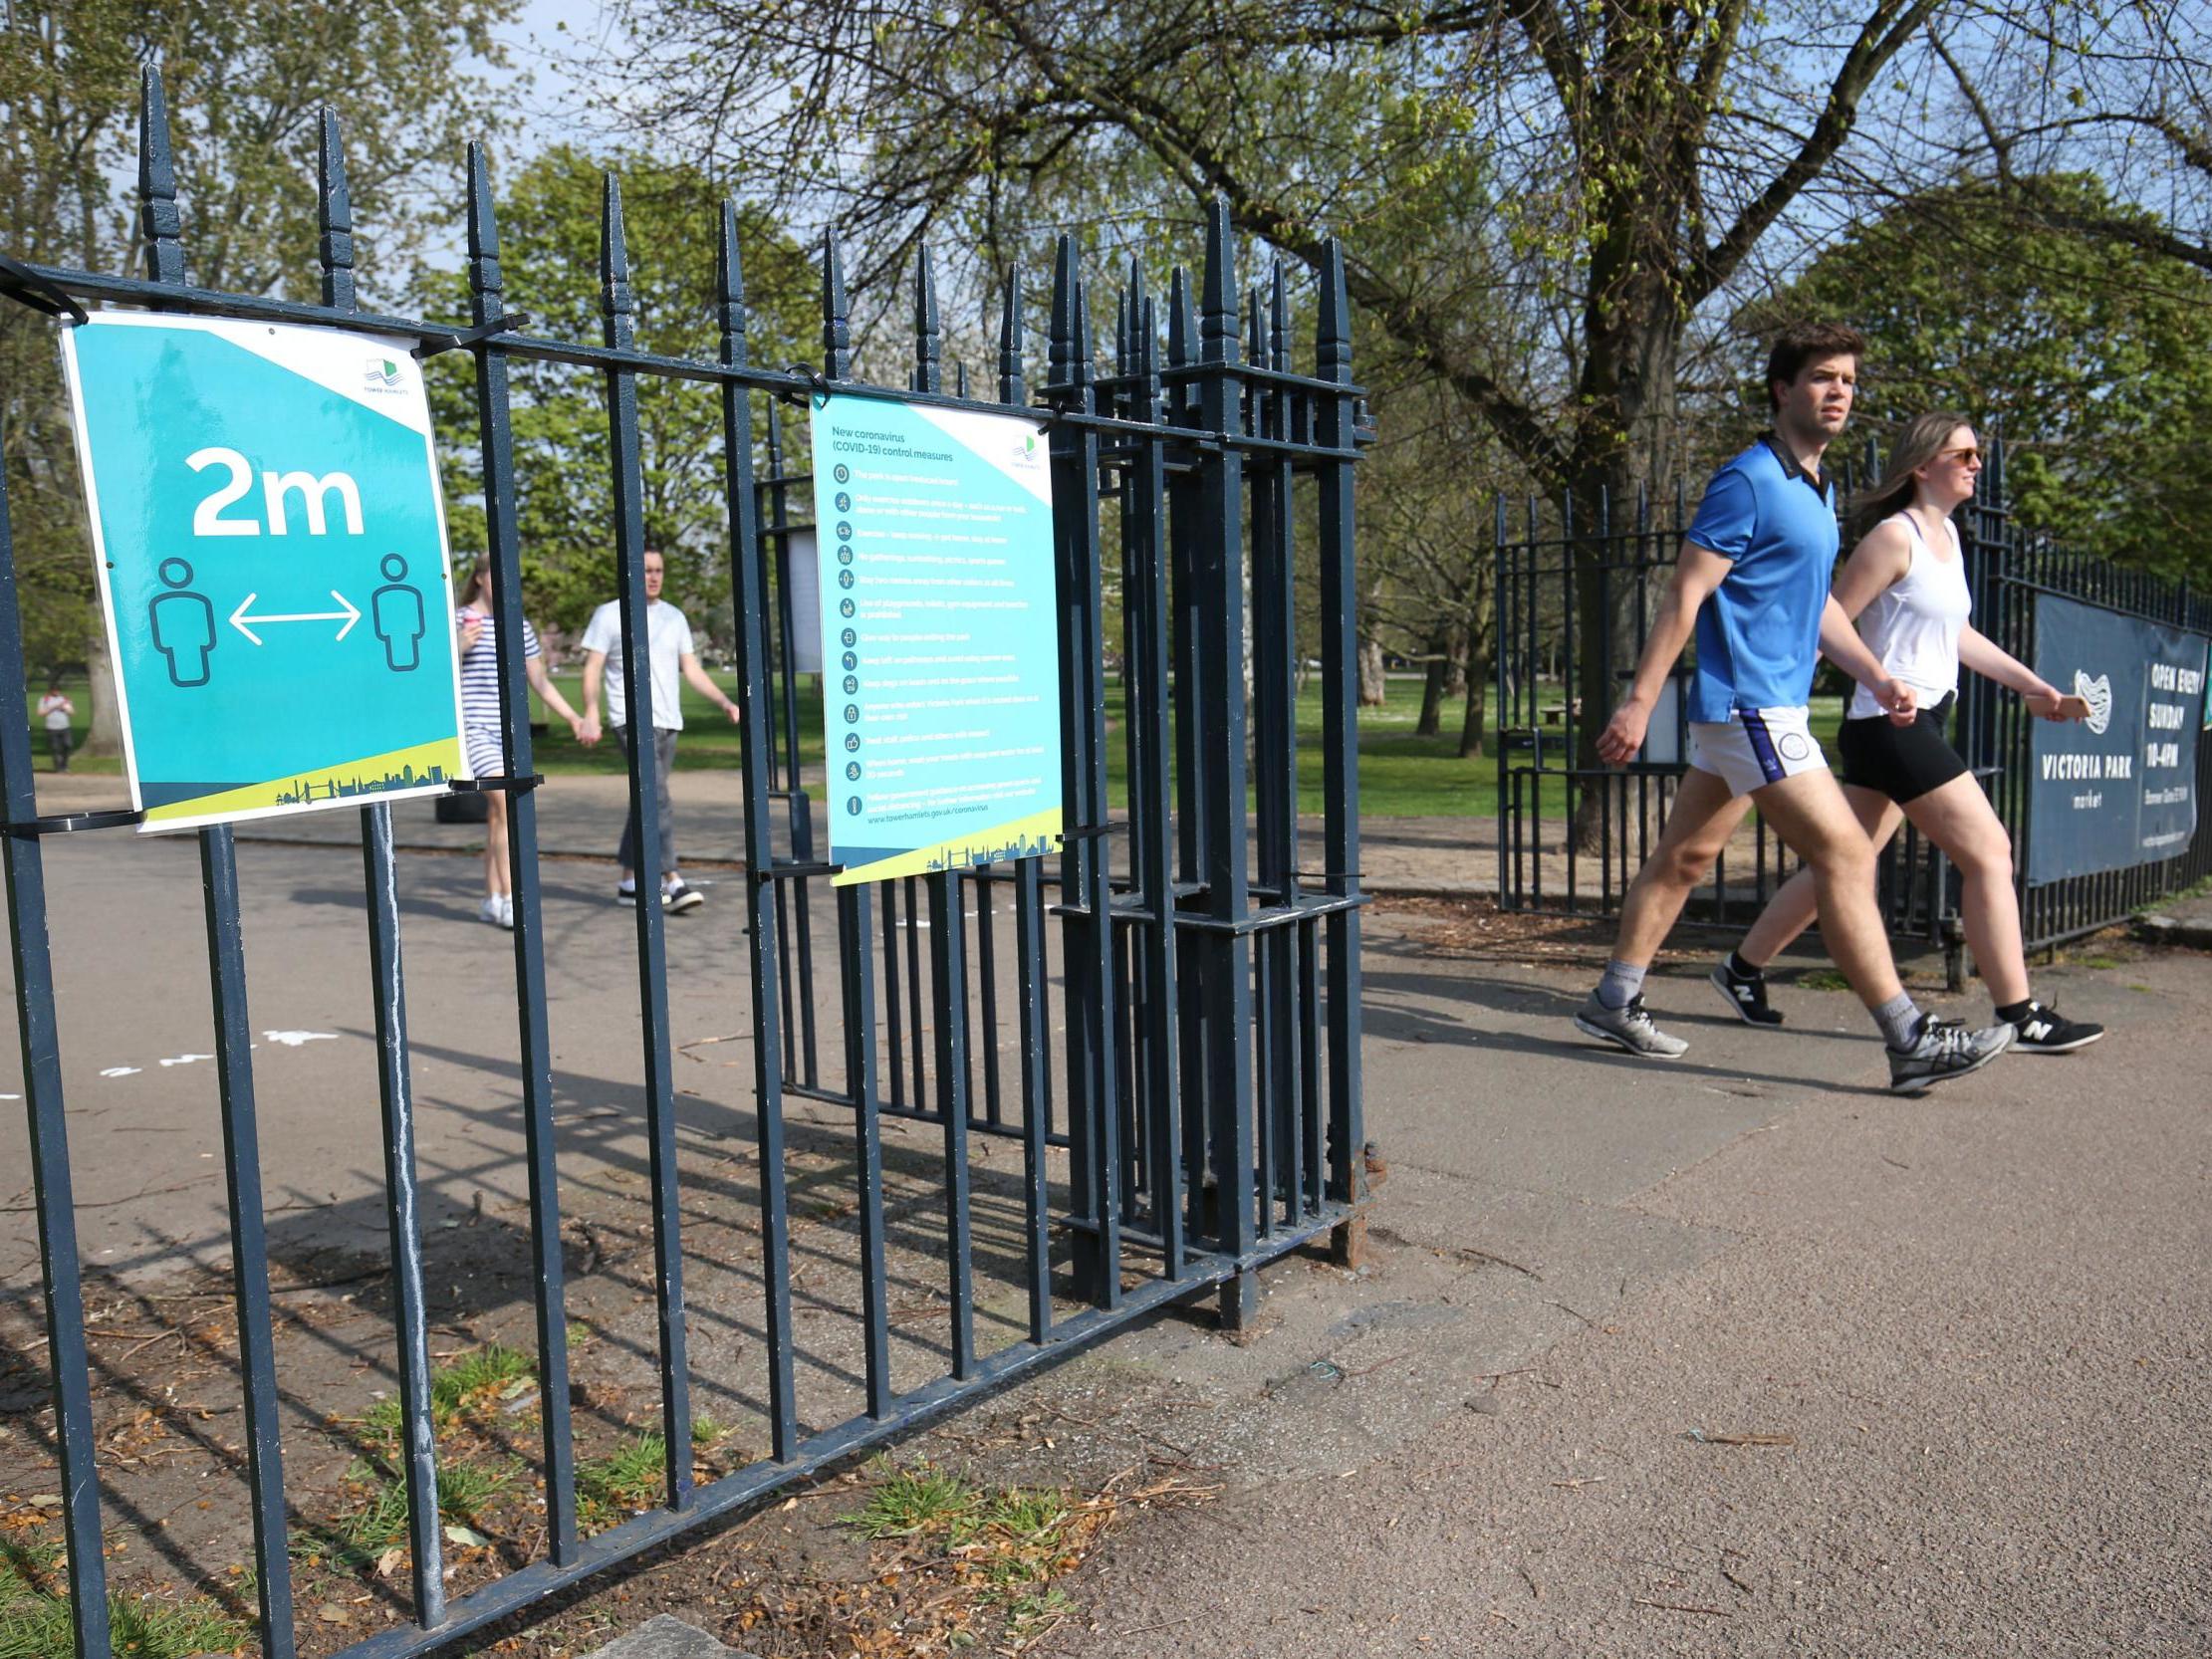 Signs on the gates reminding people to 'social-distance' at Victoria Park in east London